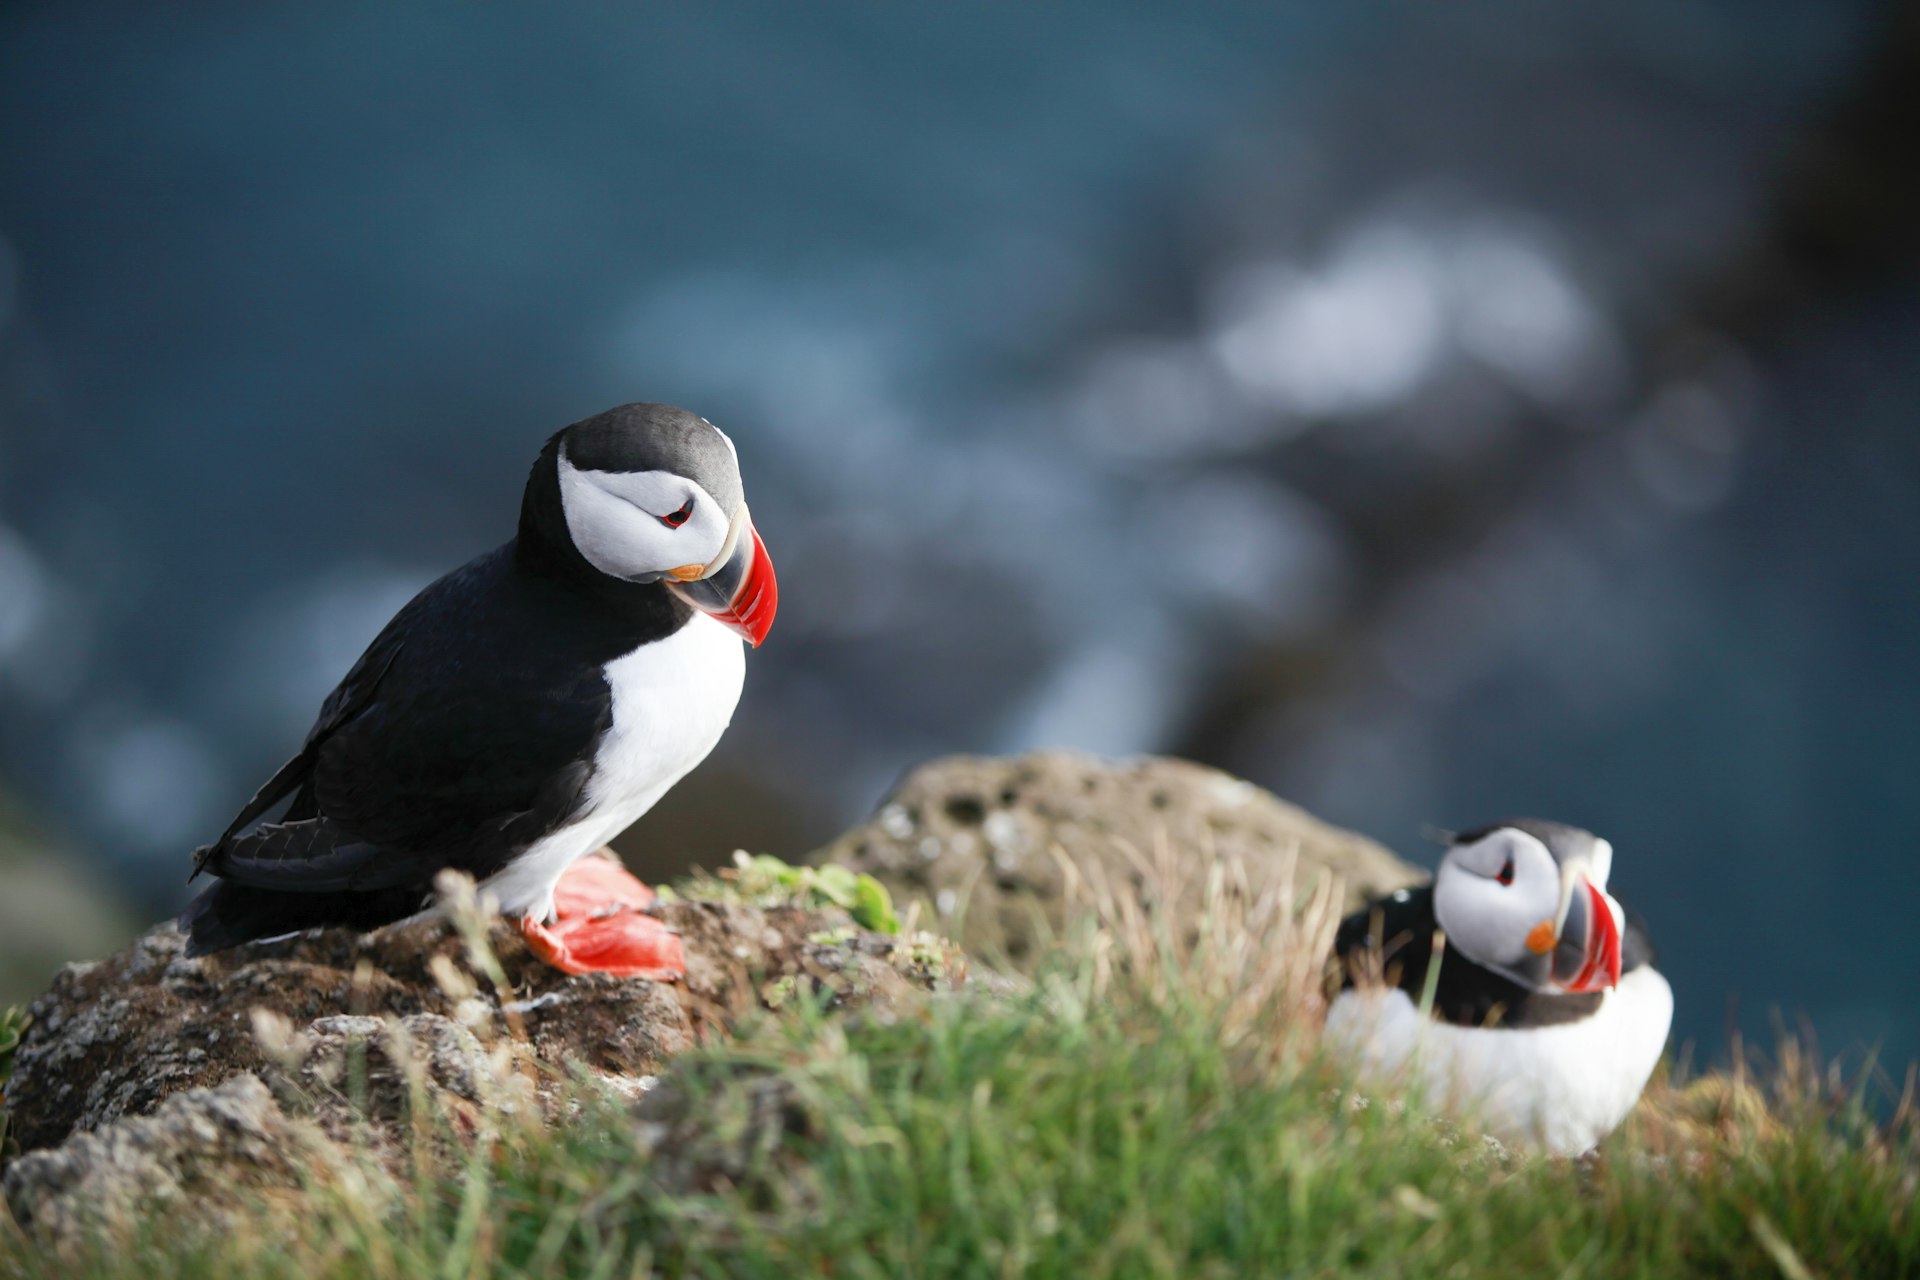 Two puffins -- black-and-white birds with red, orange and yellow feet and beaks -- sit on the edge of a cliff